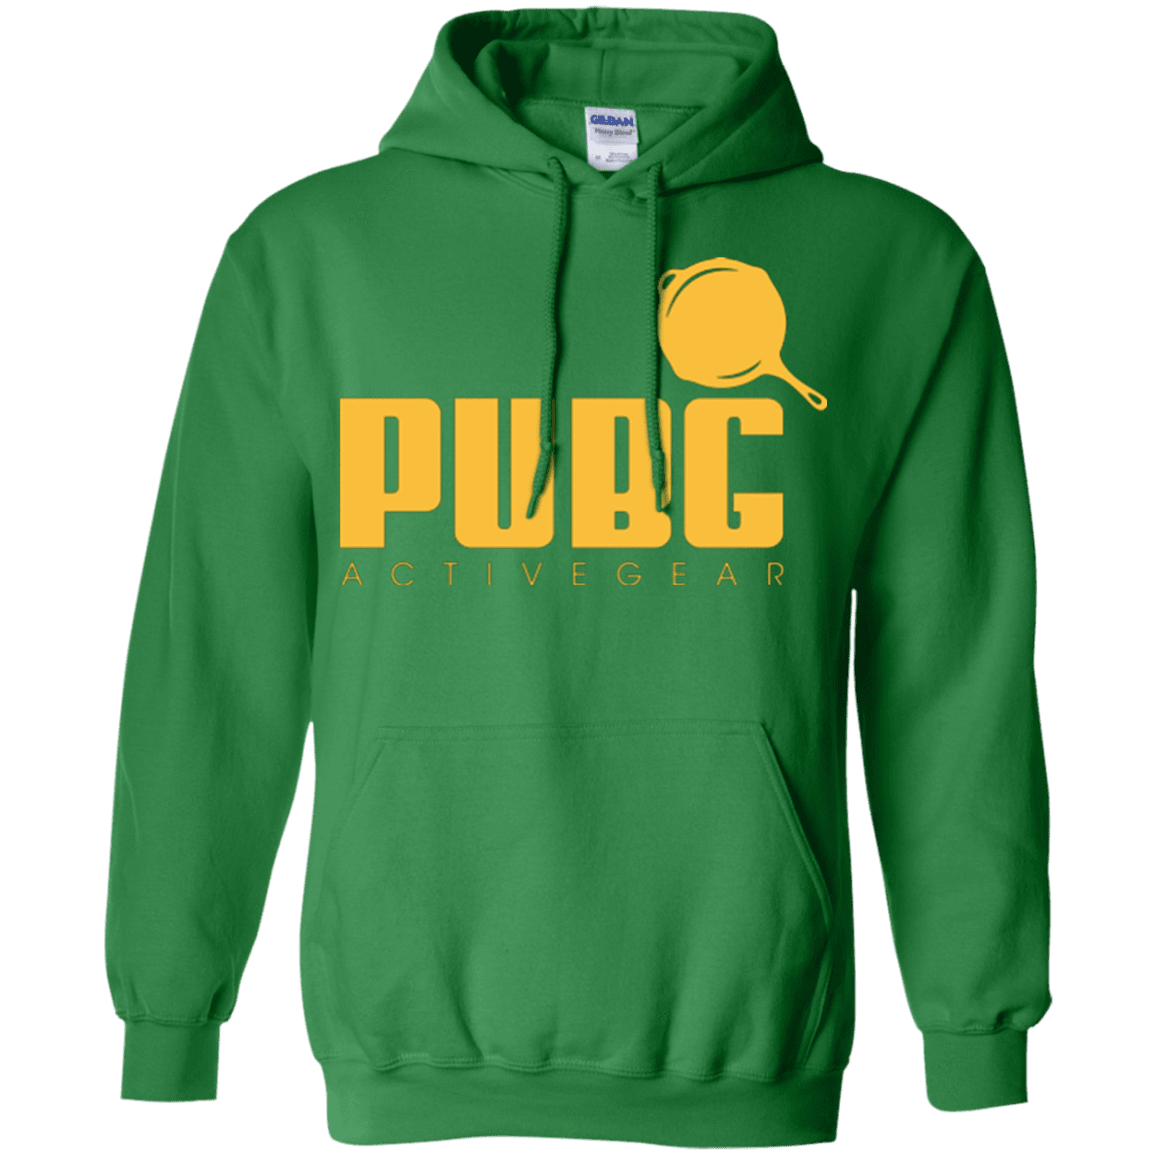 Active Gear Pullover Hoodie